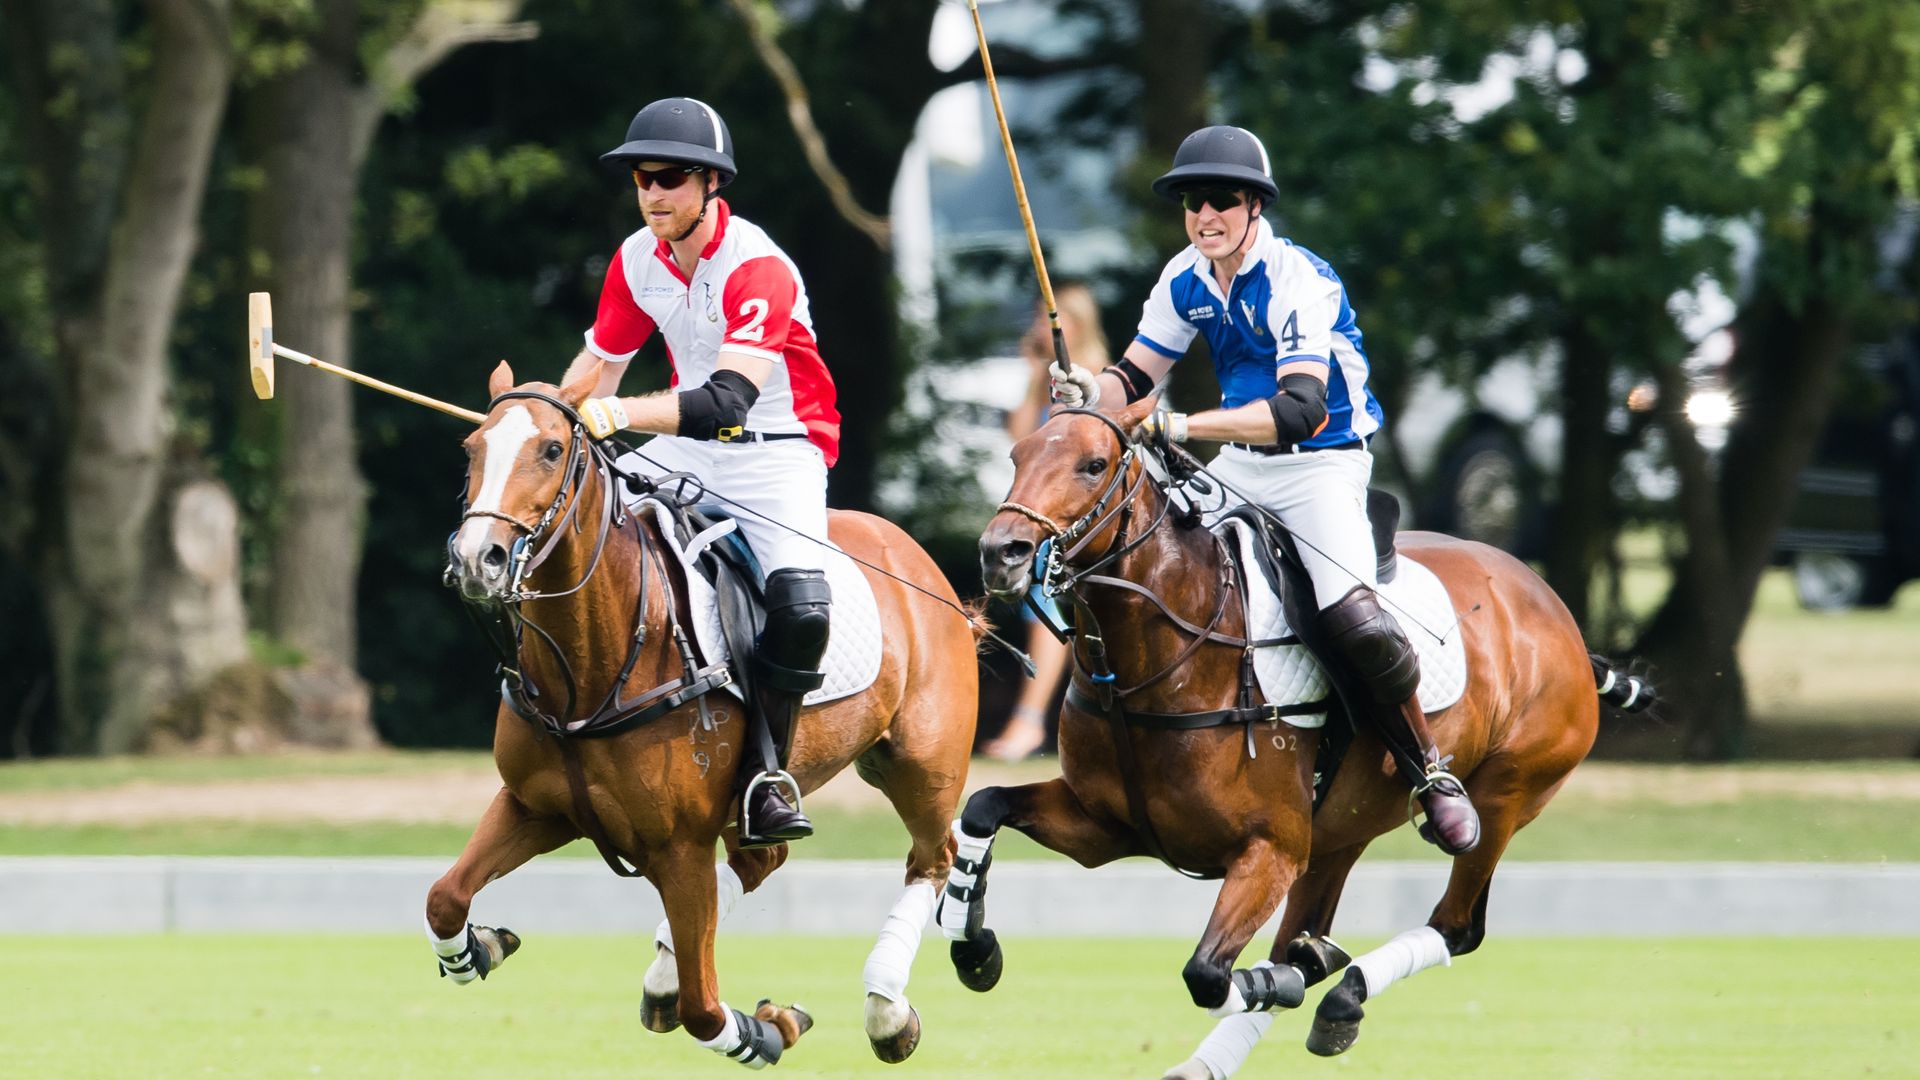 Prince William, Duke of Cambridge and Prince Harry, Duke of Sussex play during The King Power Royal Charity Polo Day